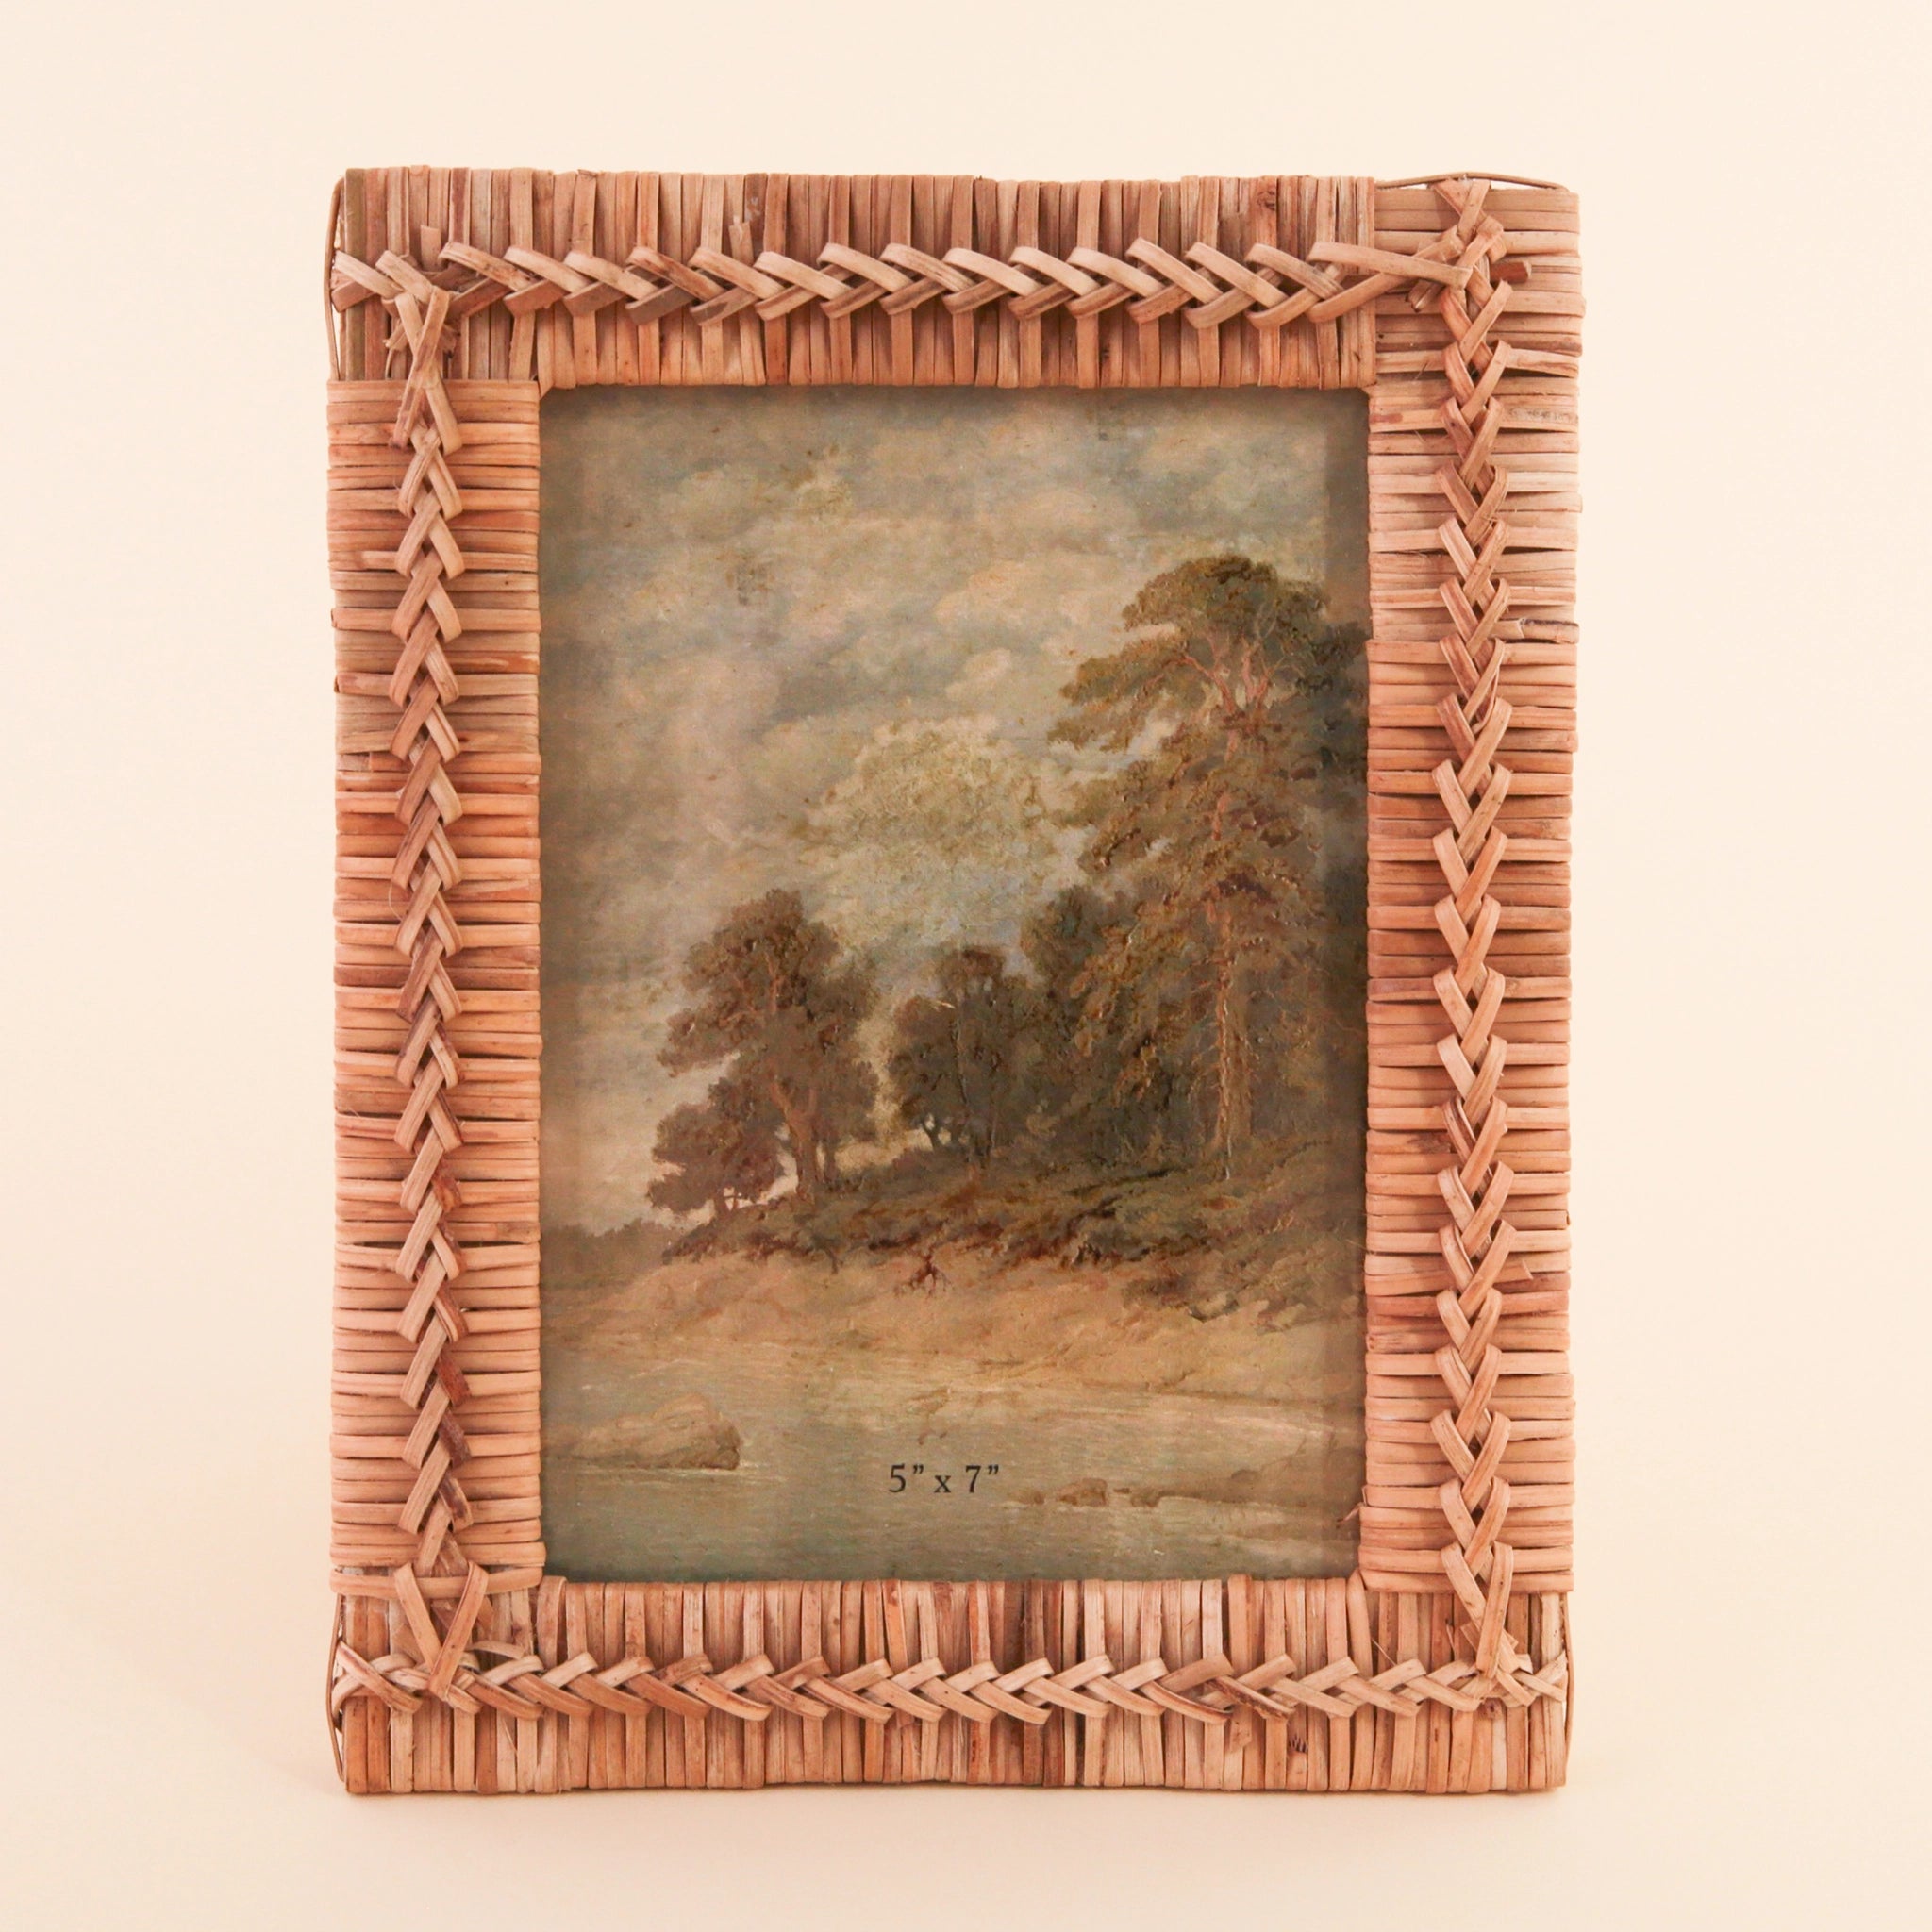 Photographed on a cream background is a 5&quot; x 7&quot; hand woven rattan frame a natural brown shade detailed with intricate stitching int he center.